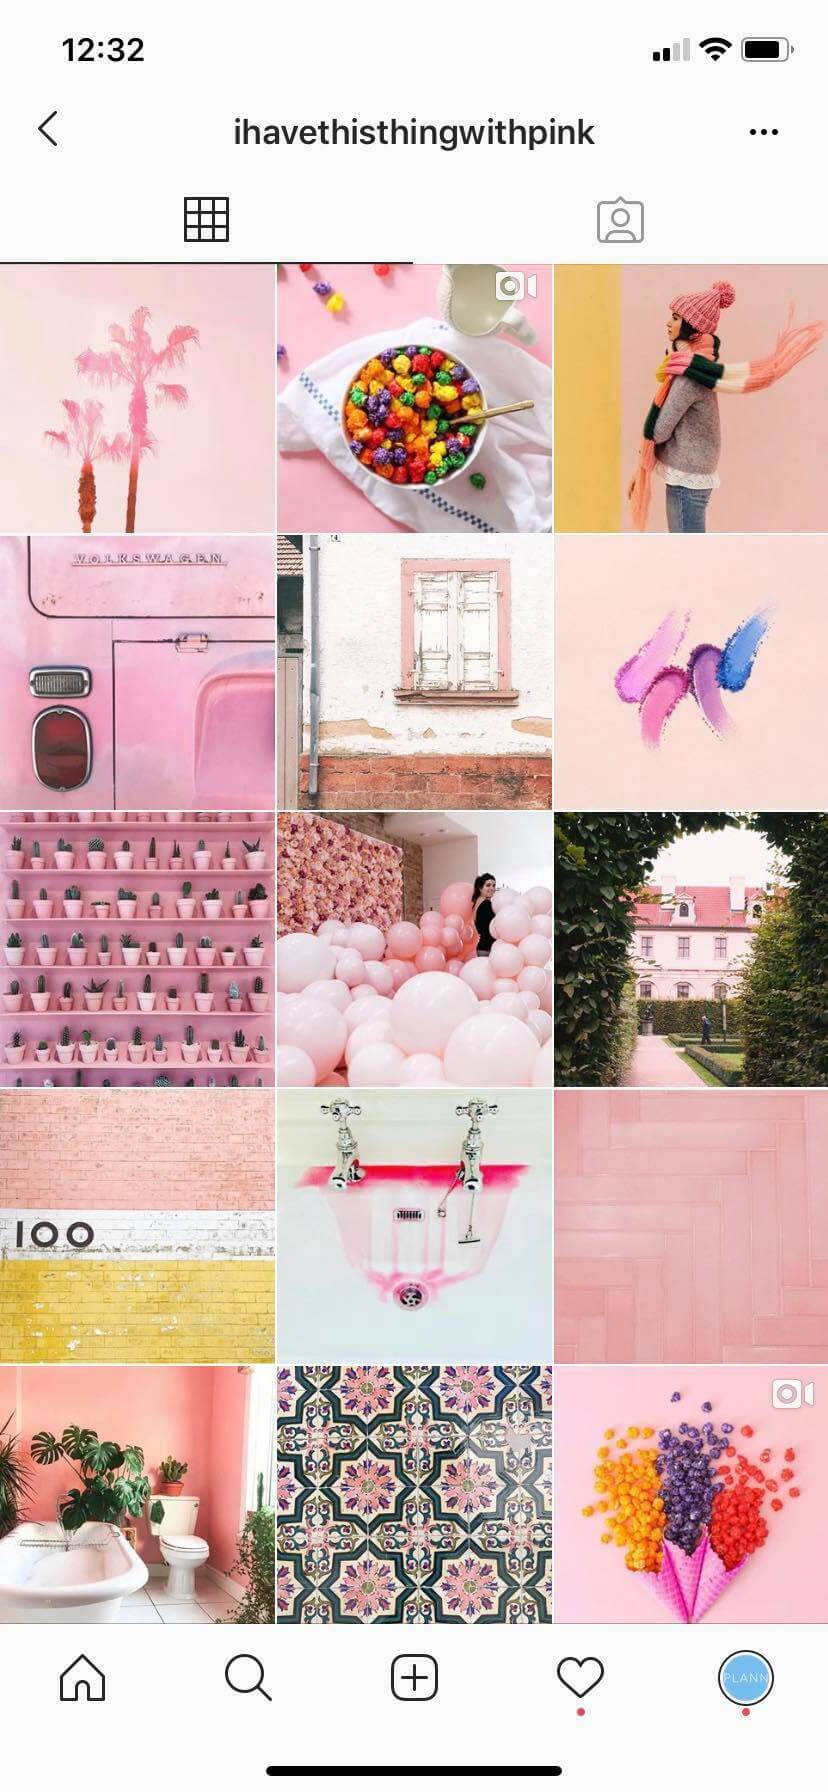 How to Create an Awesome Instagram Aesthetic